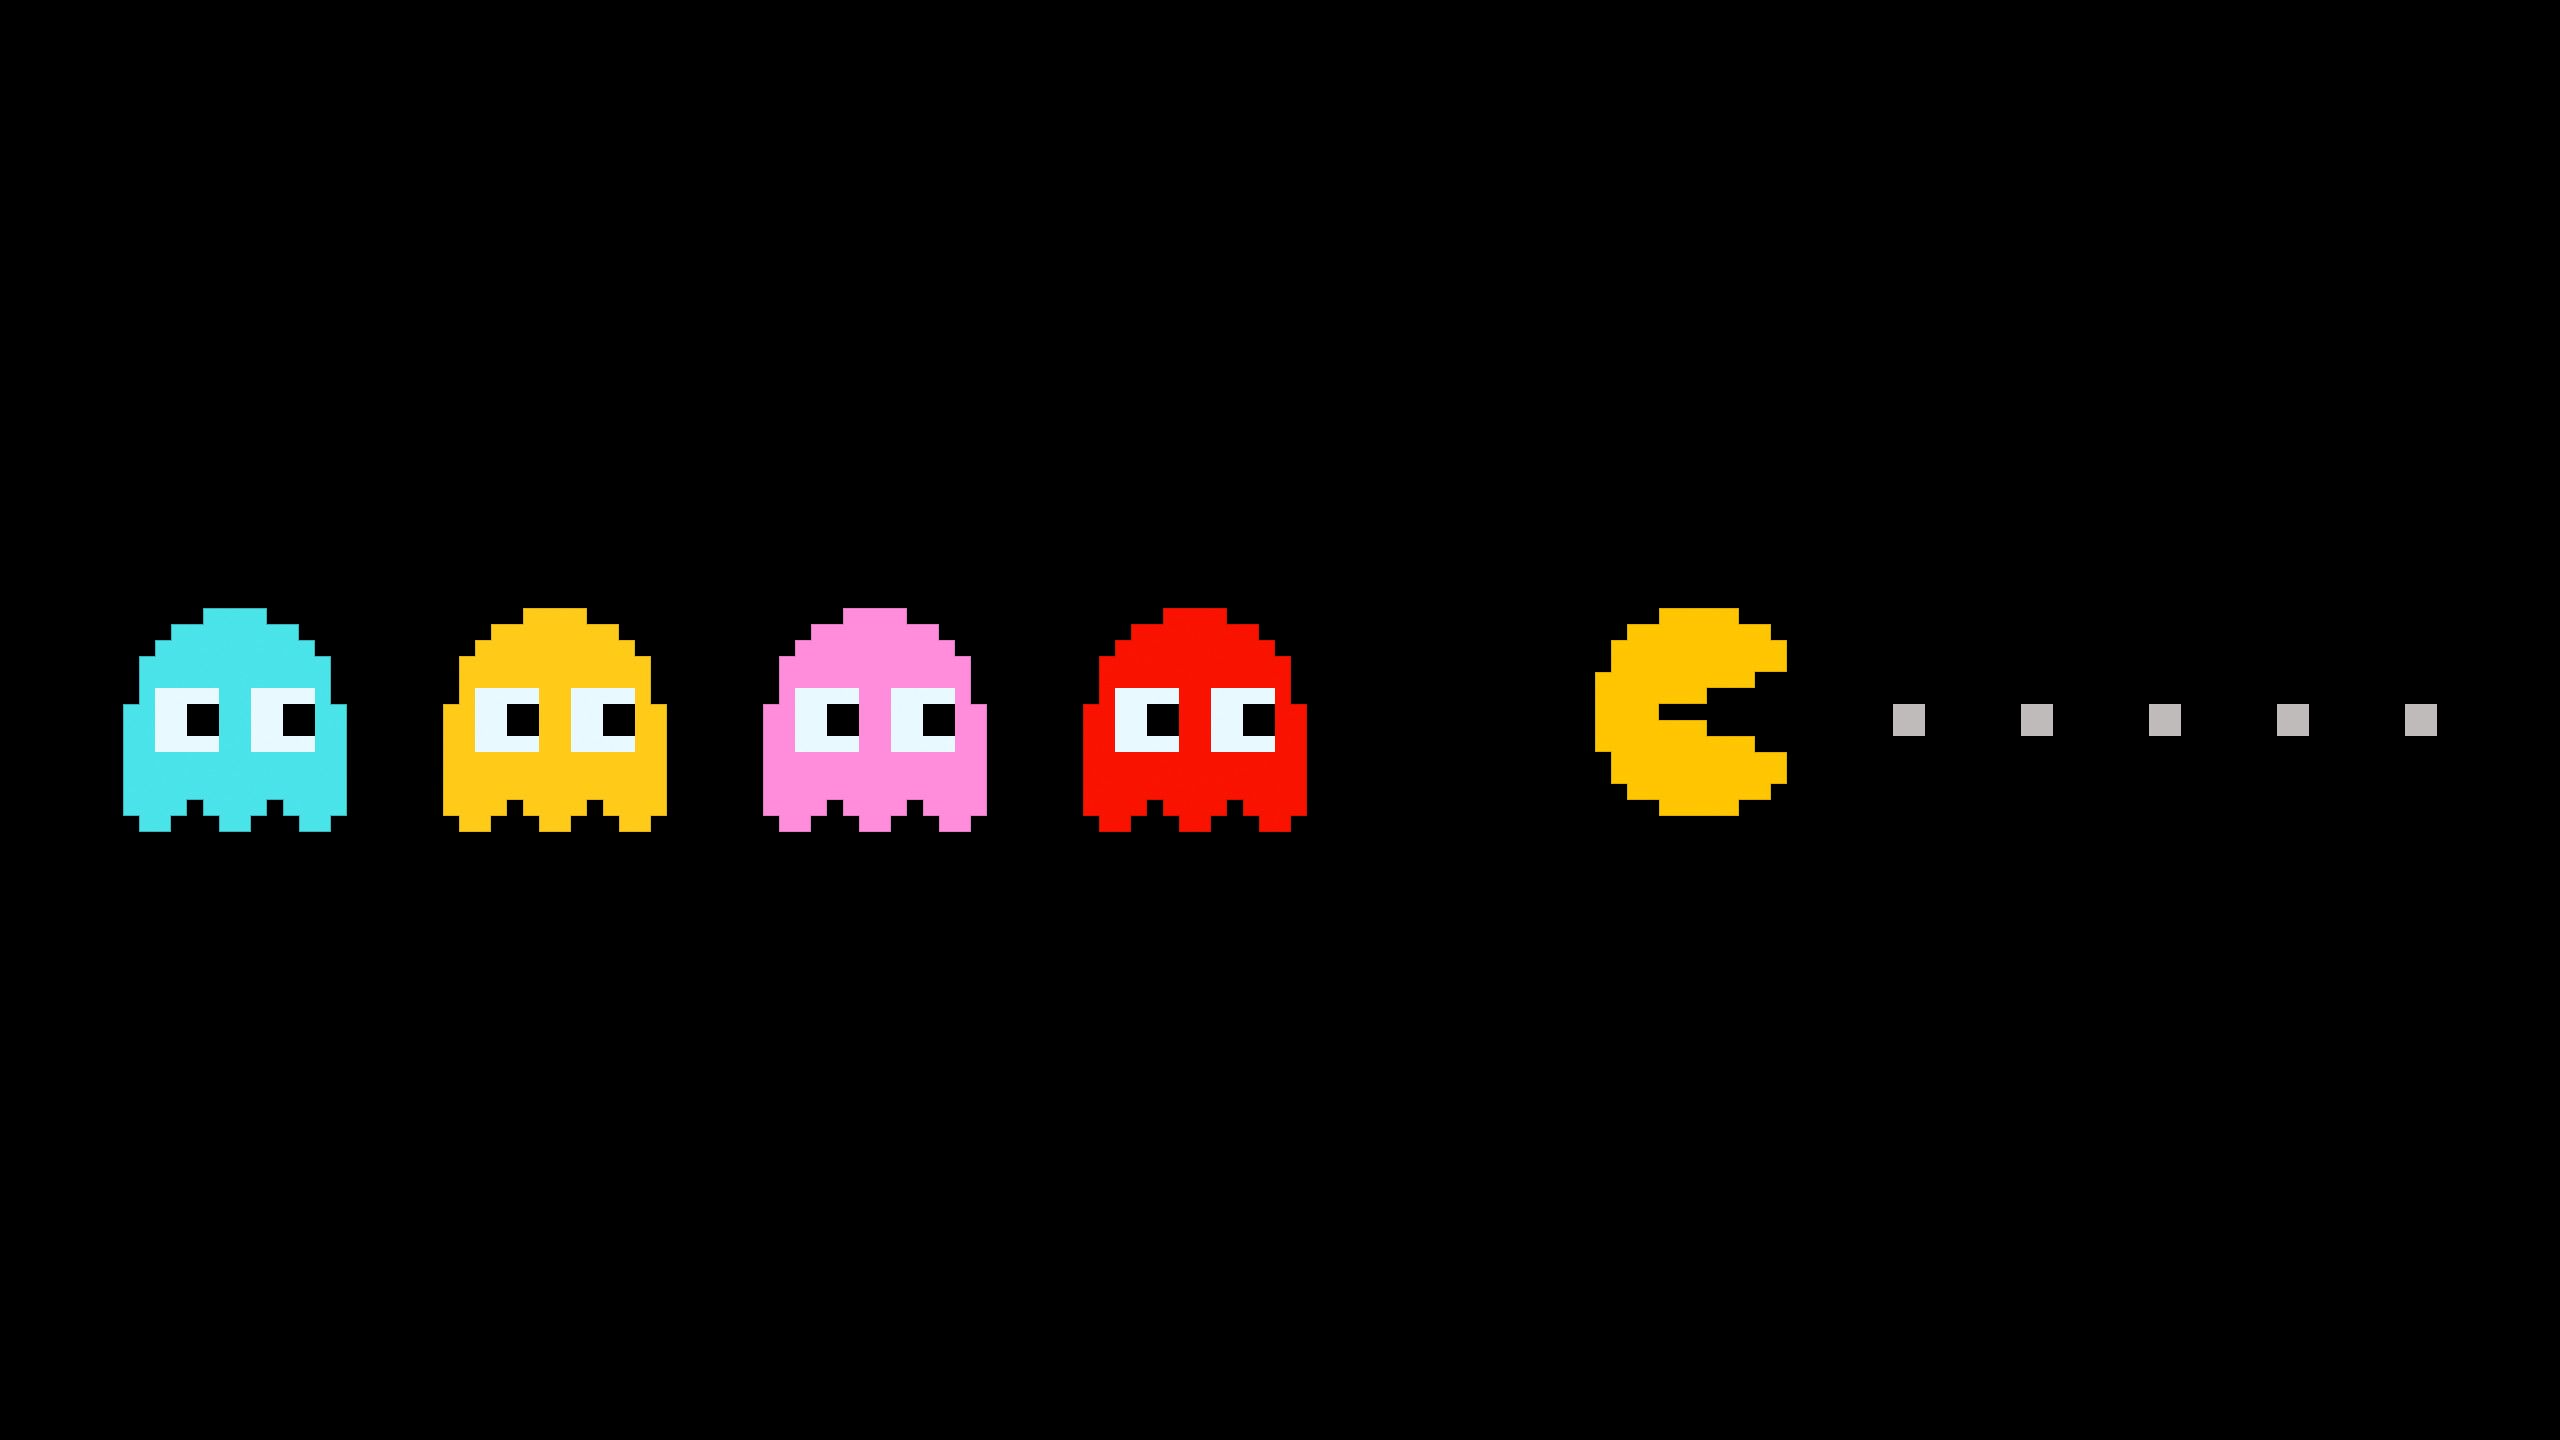 Cool Pac Man Wallpapers Top Free Cool Pac Man Backgrounds Wallpaperaccess